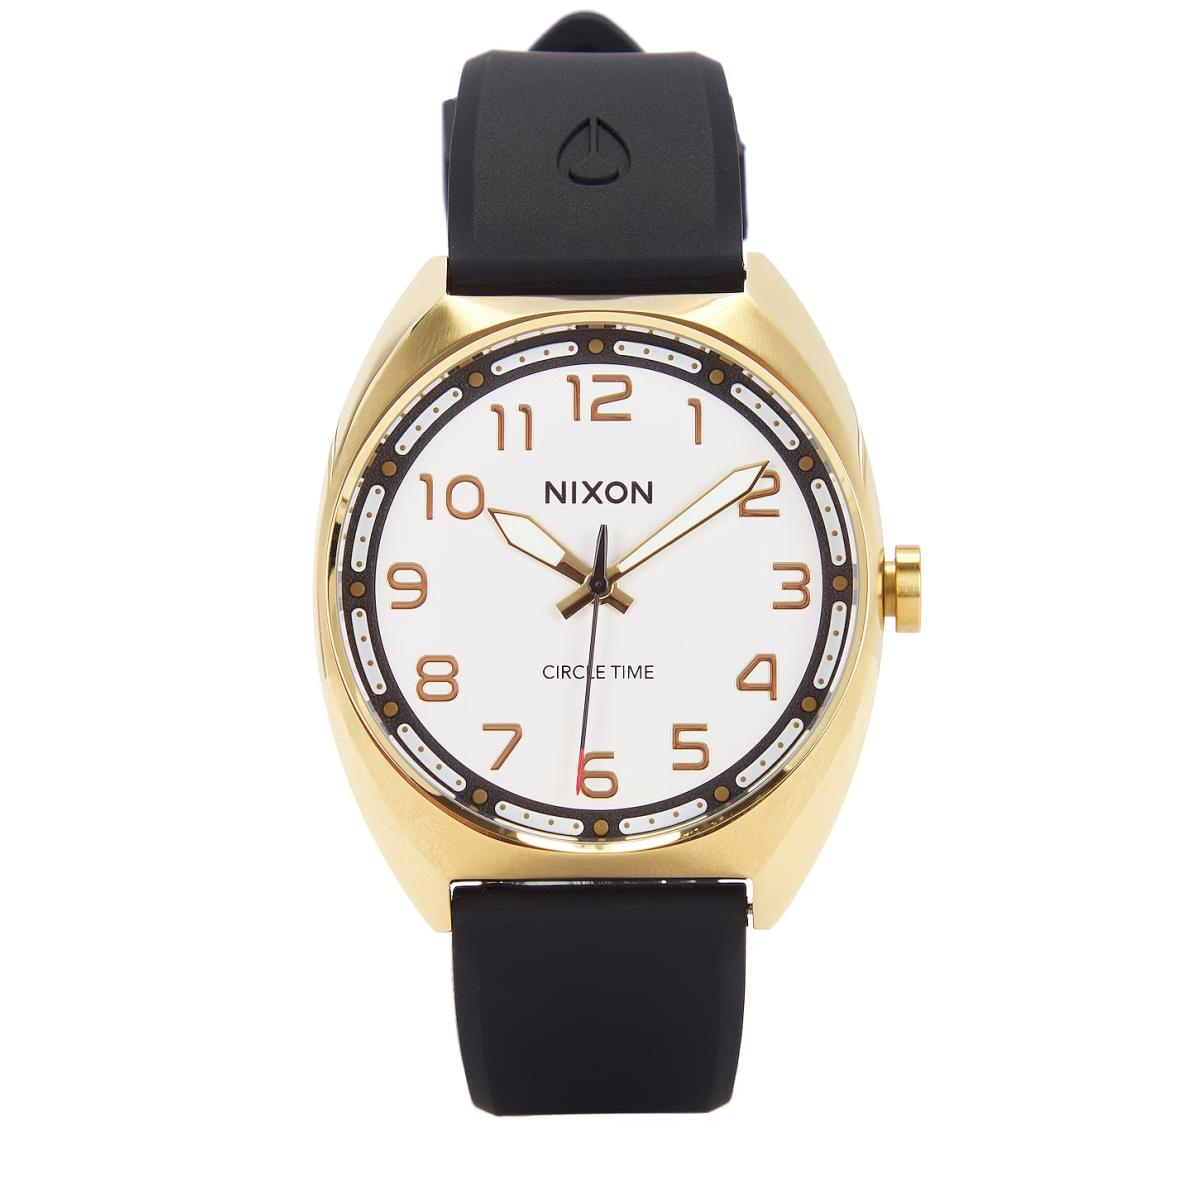 Mens Nixon Mullet Watch Gold White Black Waterproof Silicone Band - Black , Gold , White